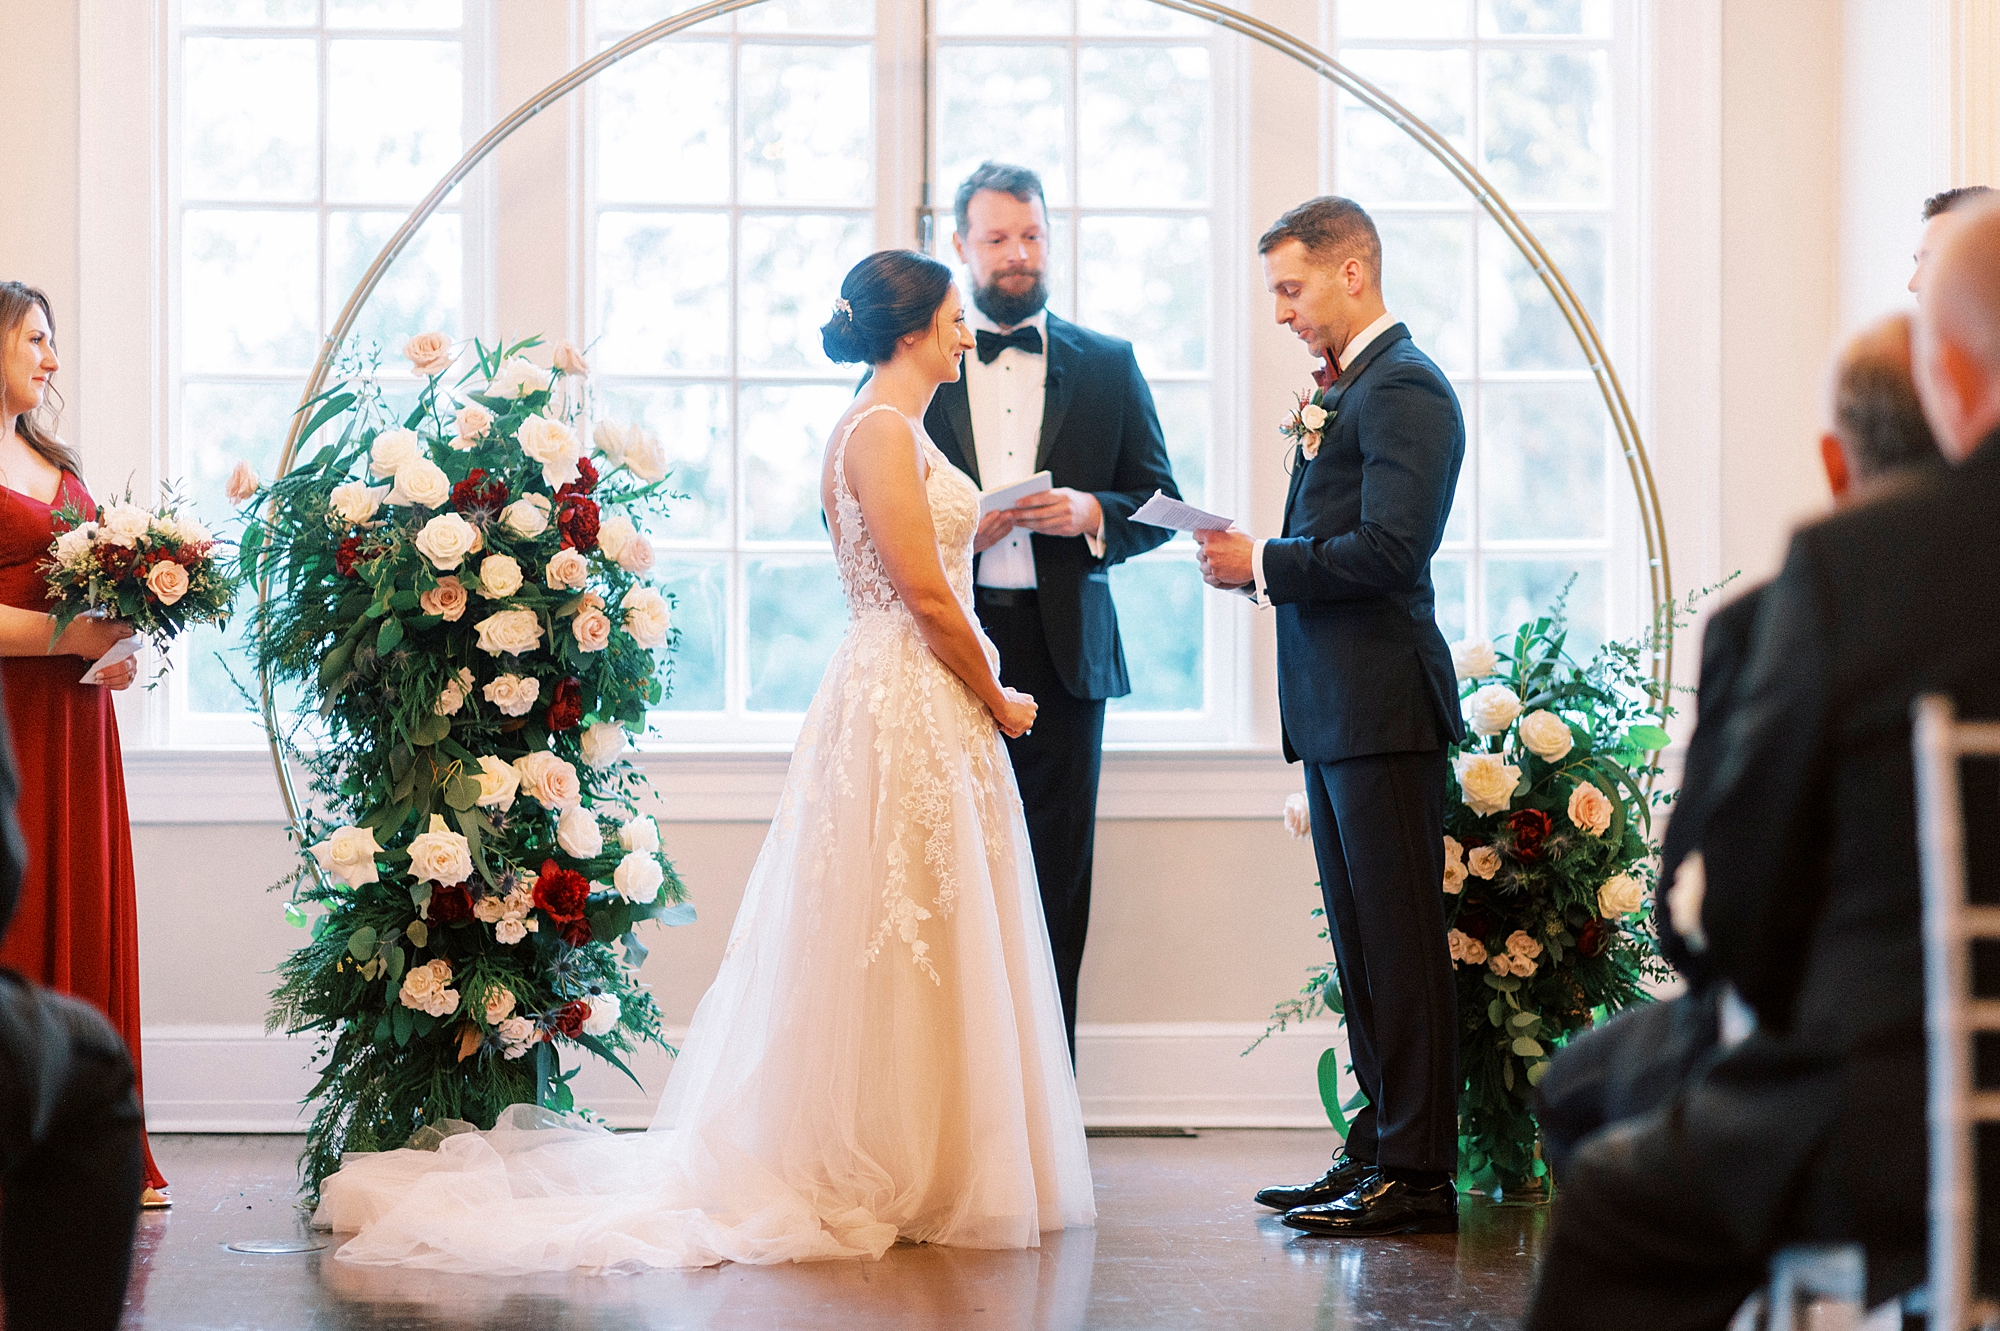 newlyweds exchange vows during winter wedding ceremony at Separk Mansion